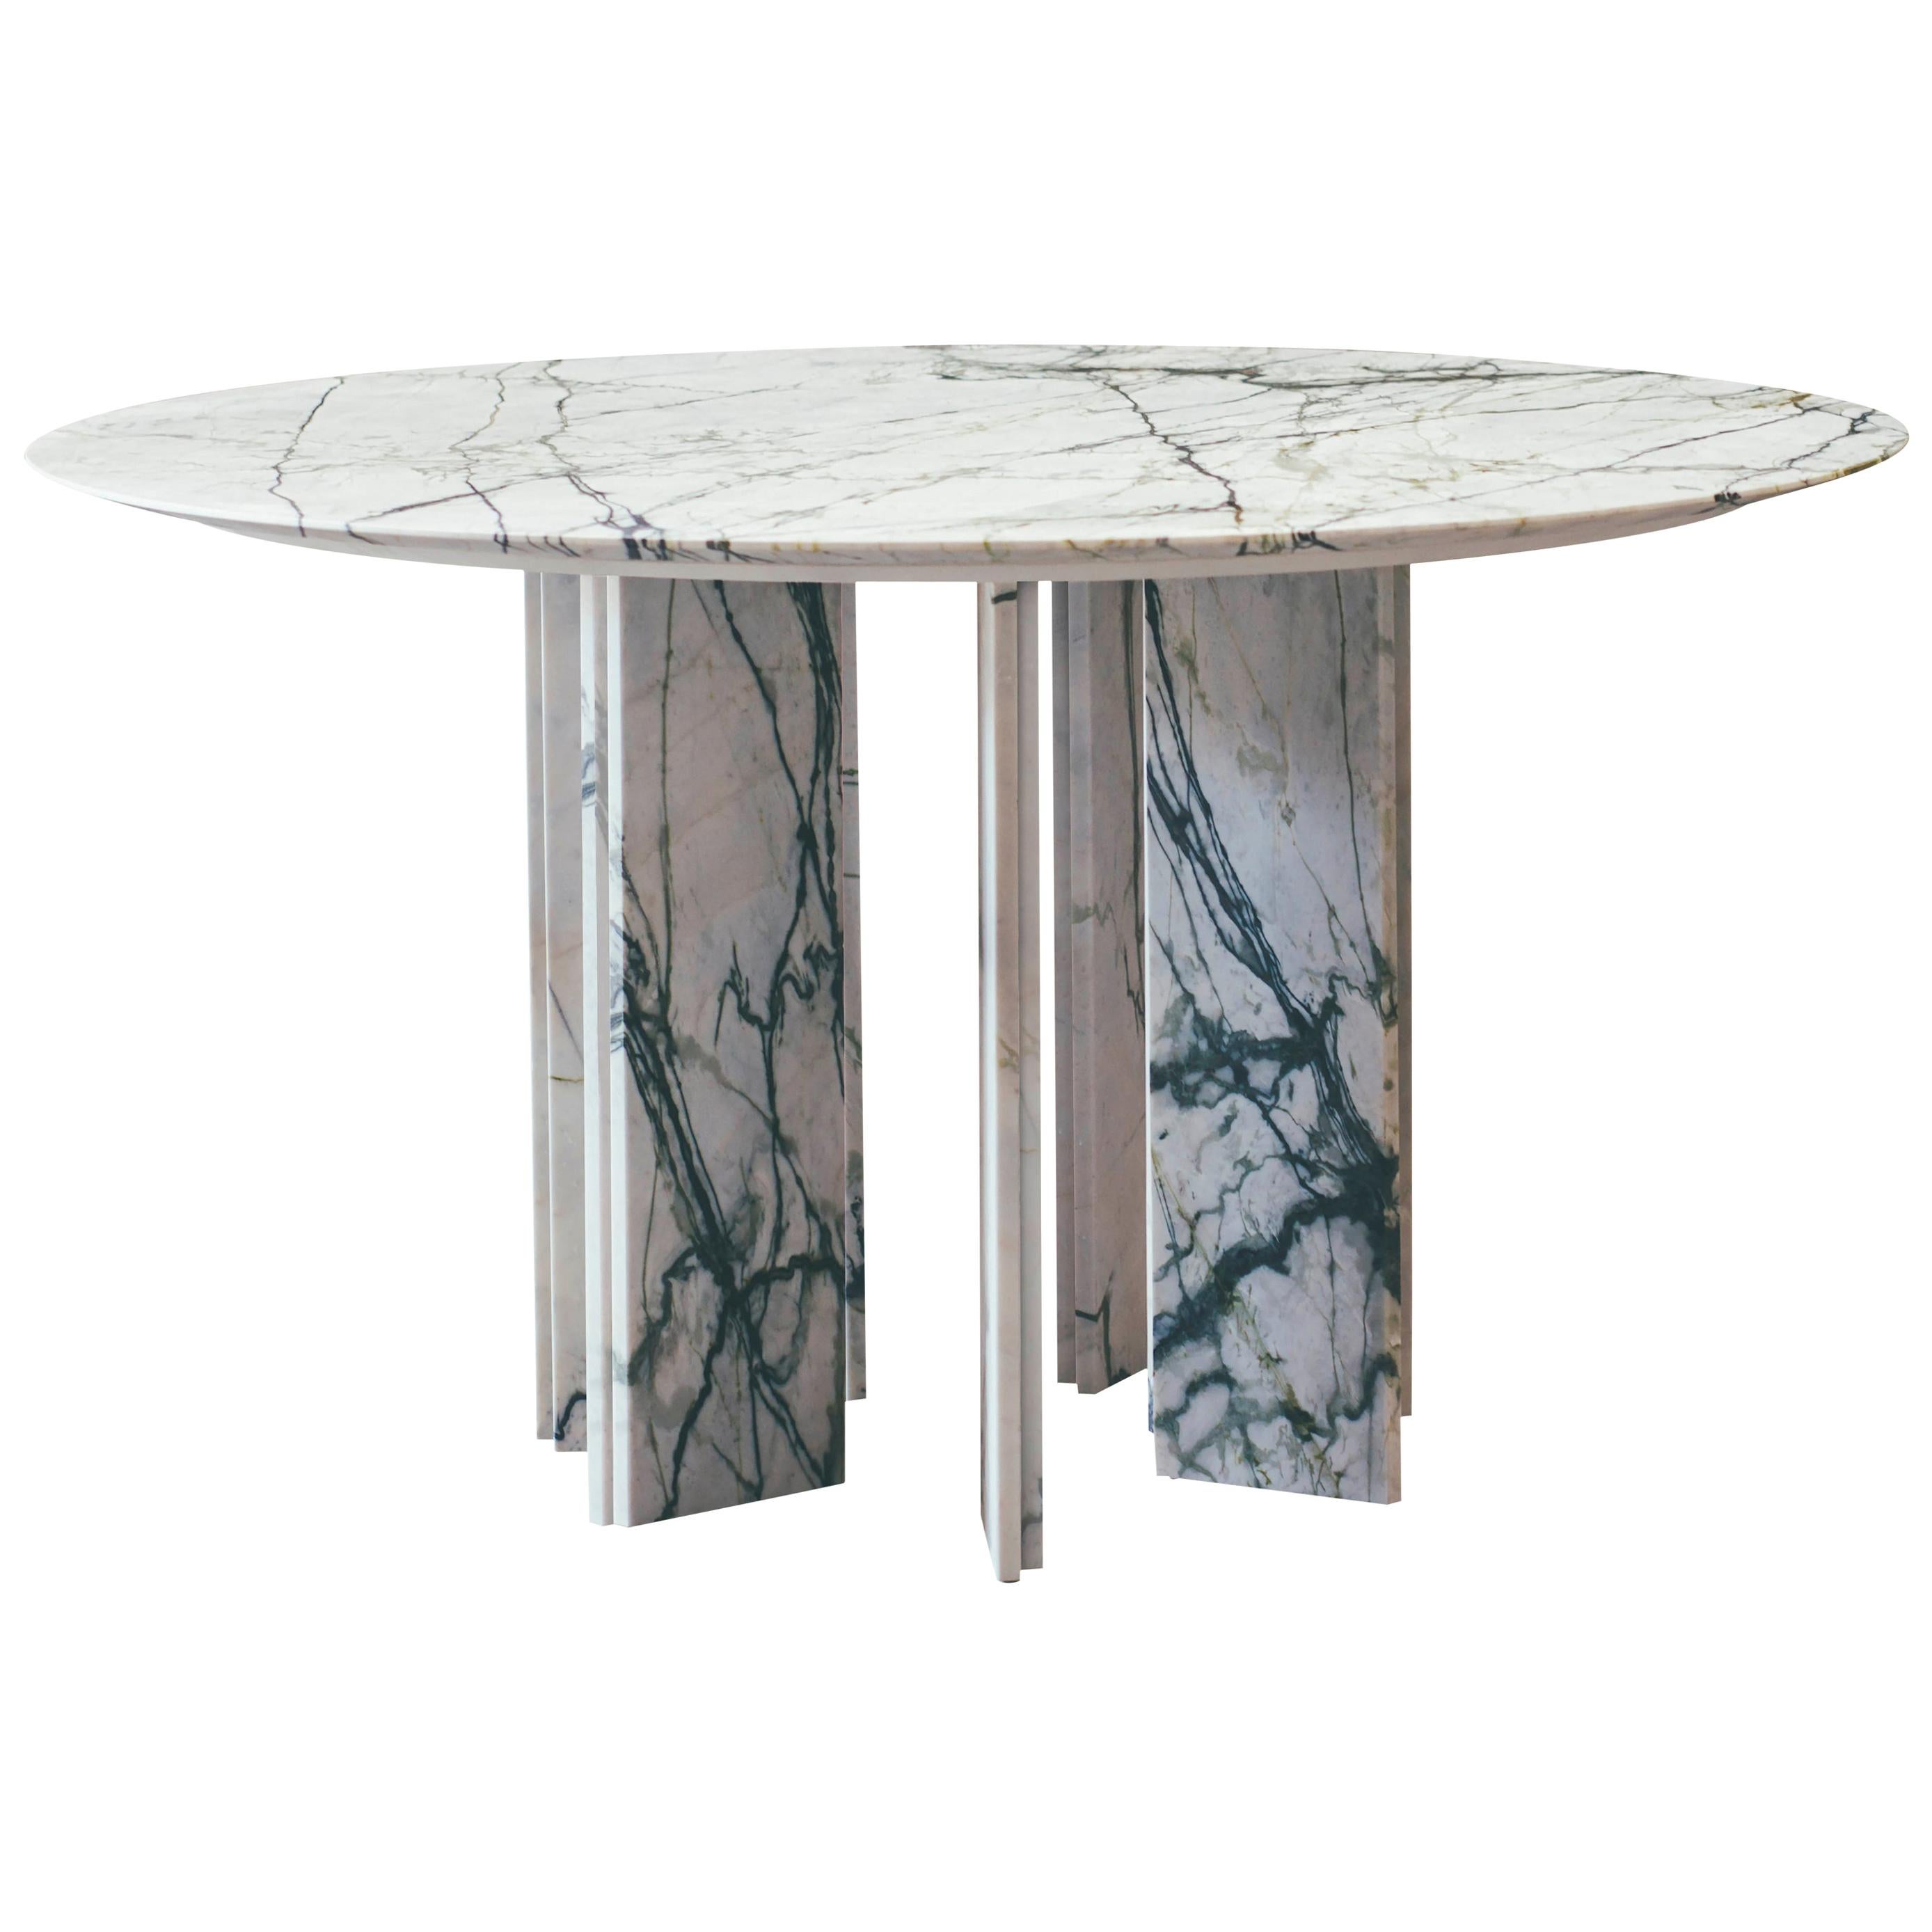 Contemporary oval ellipse dining table in marble, 7 legs, Belgian design